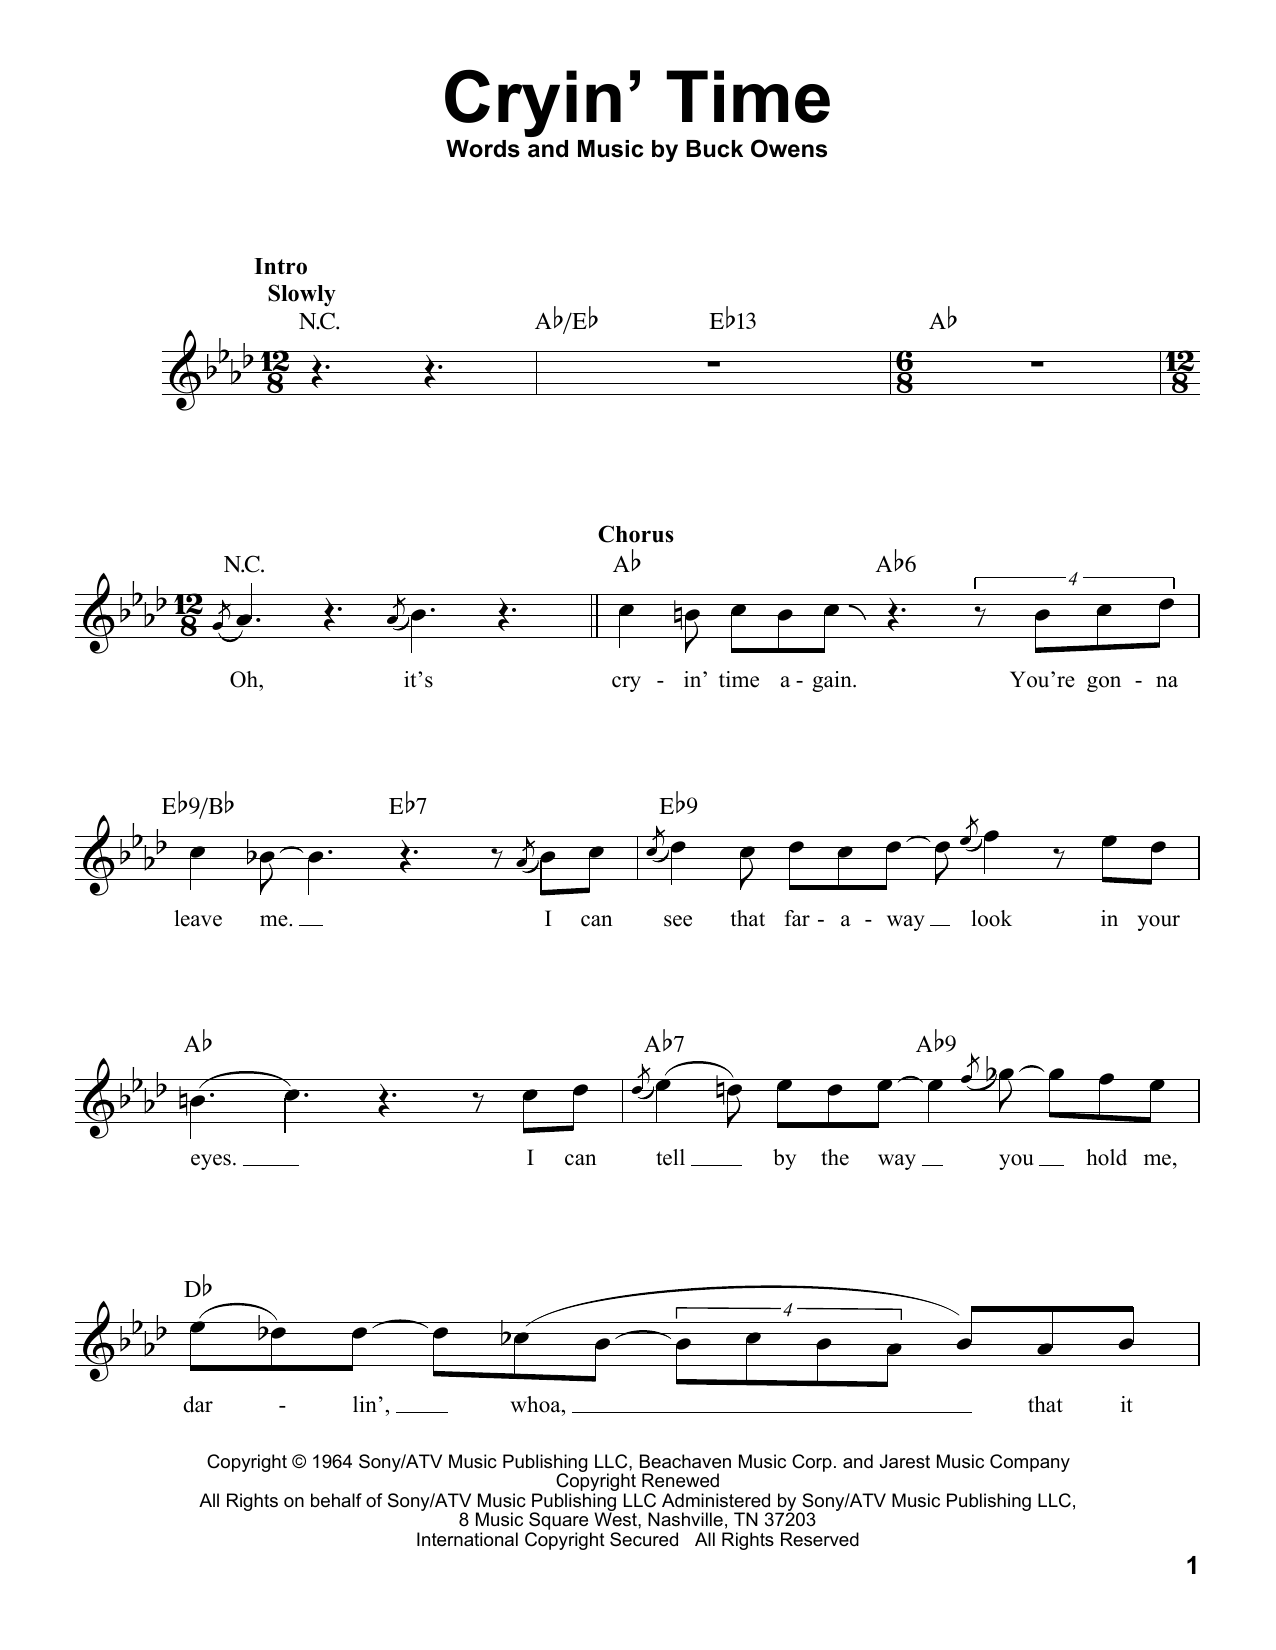 Download Ray Charles Cryin' Time Sheet Music